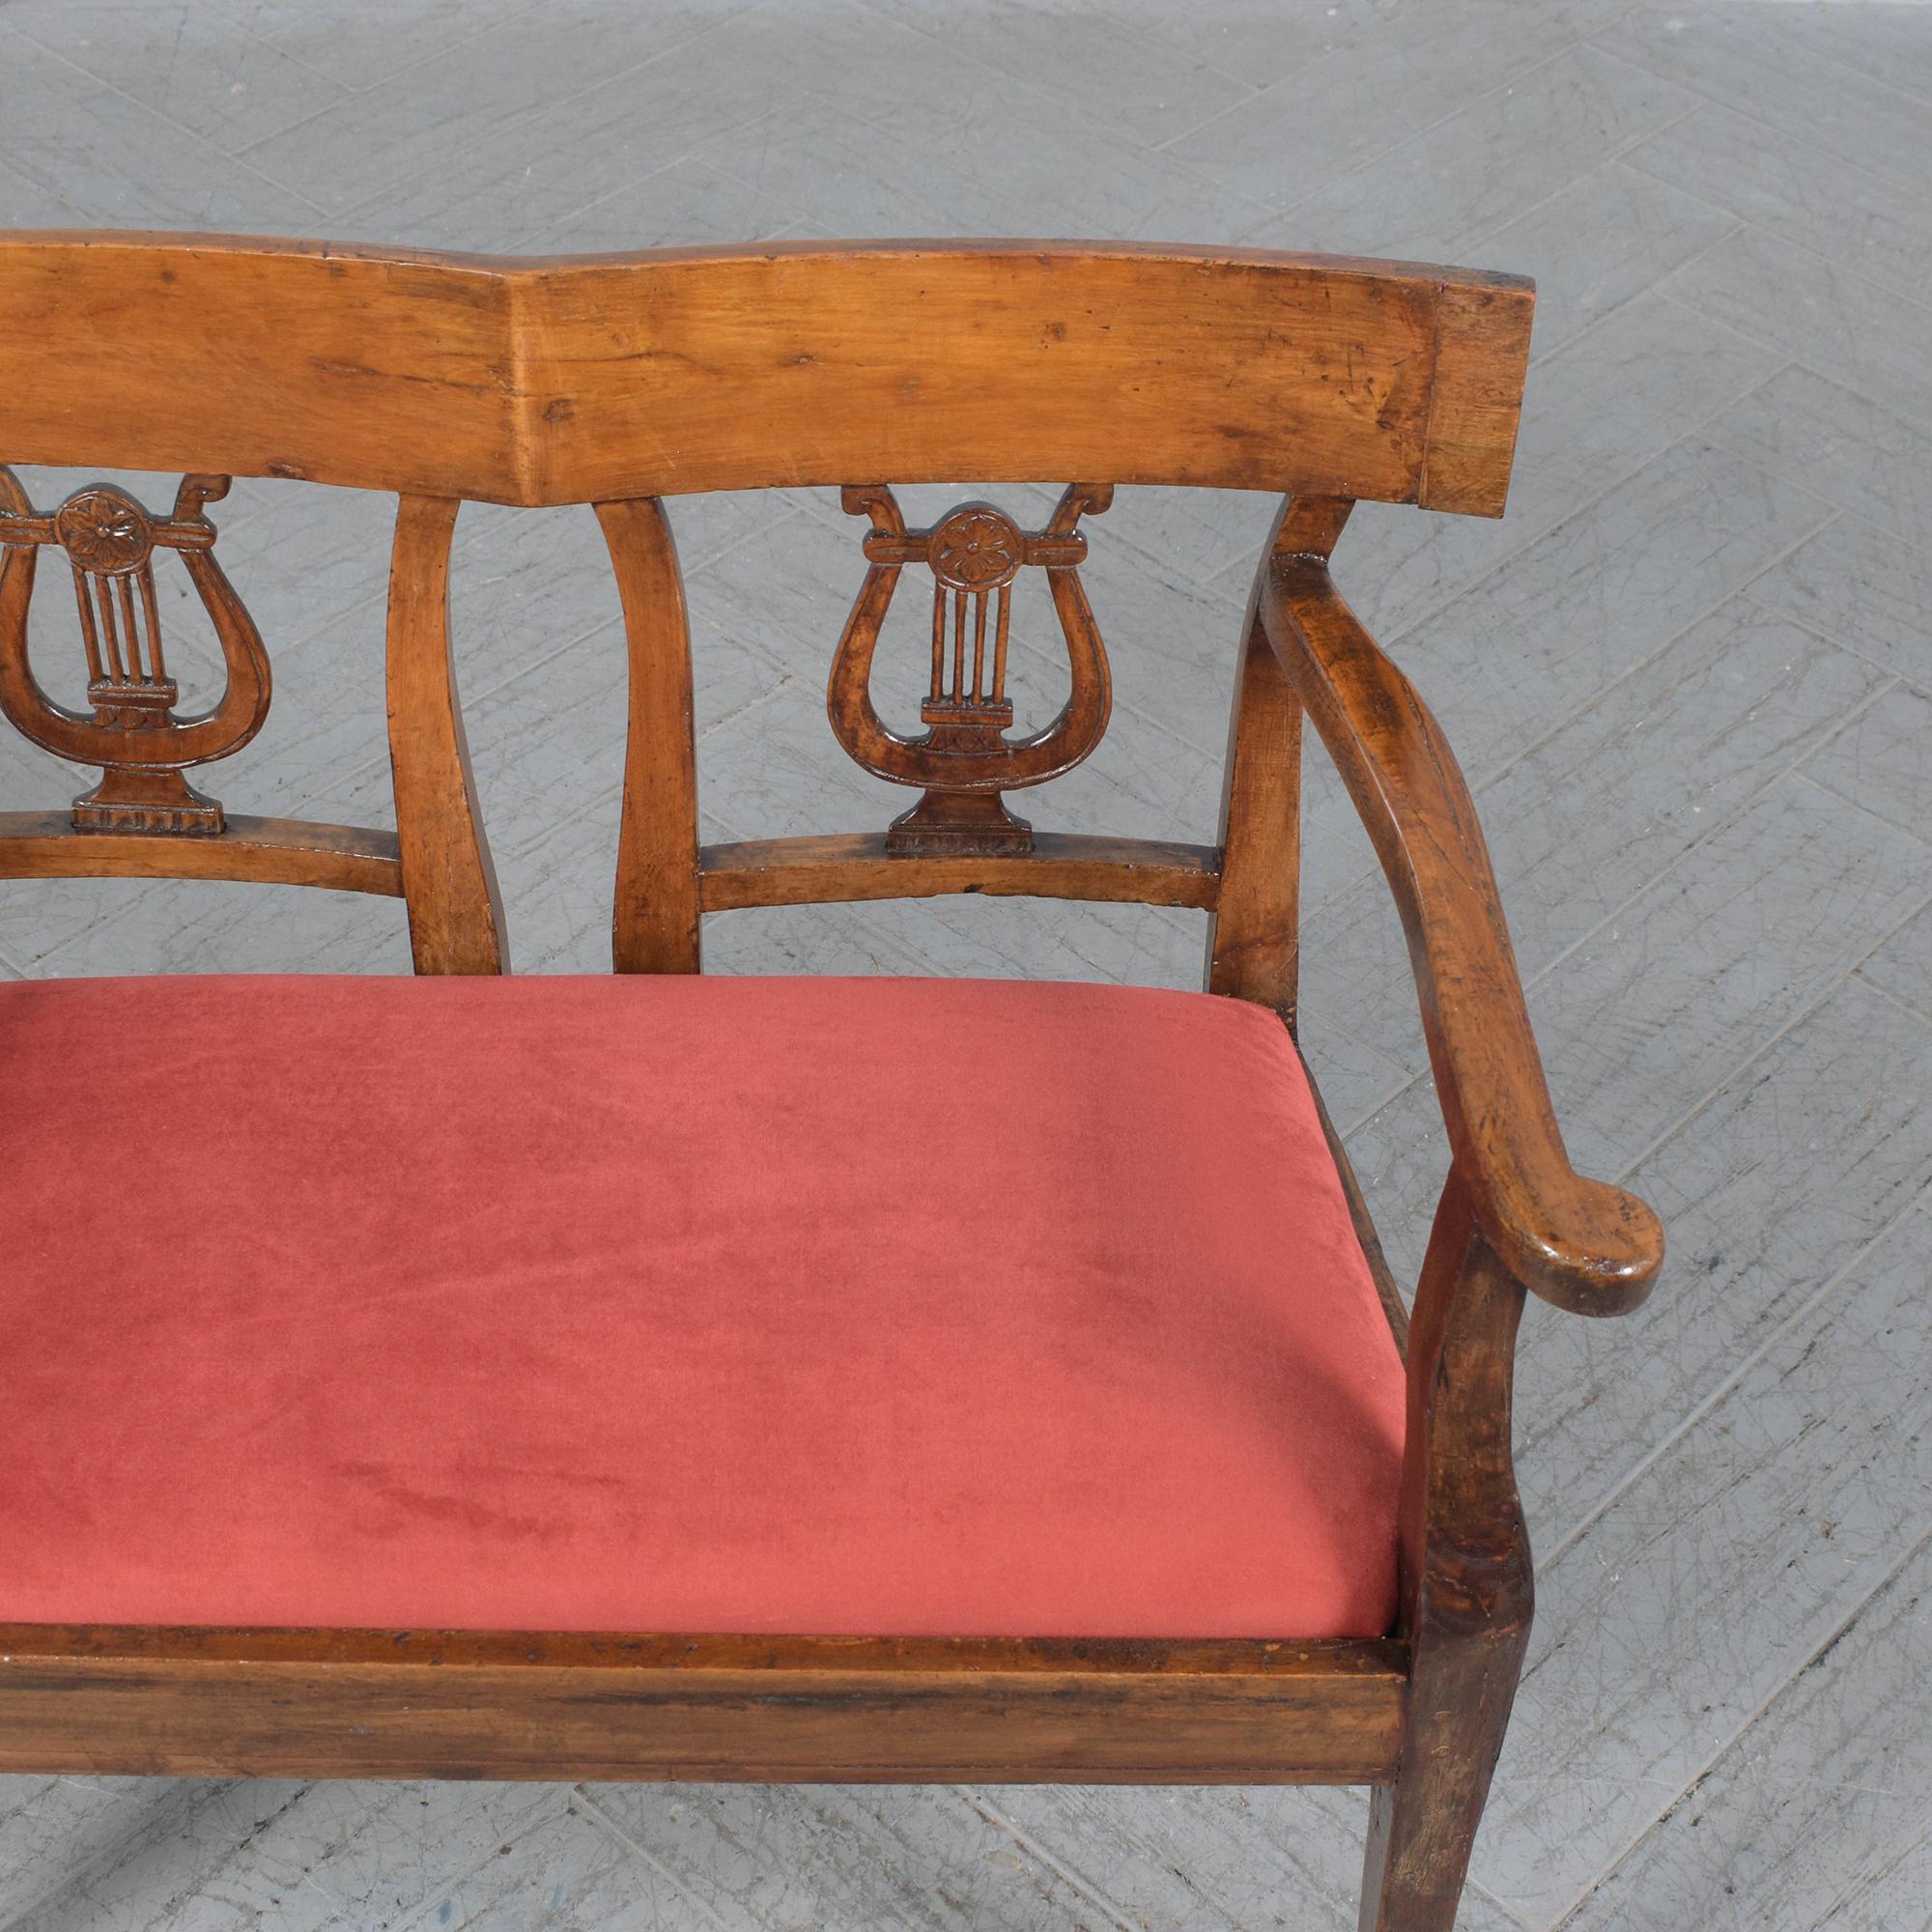 Neoclassical Revival Late 18th-Century English Walnut Bench: Historical Craftsmanship Restored For Sale